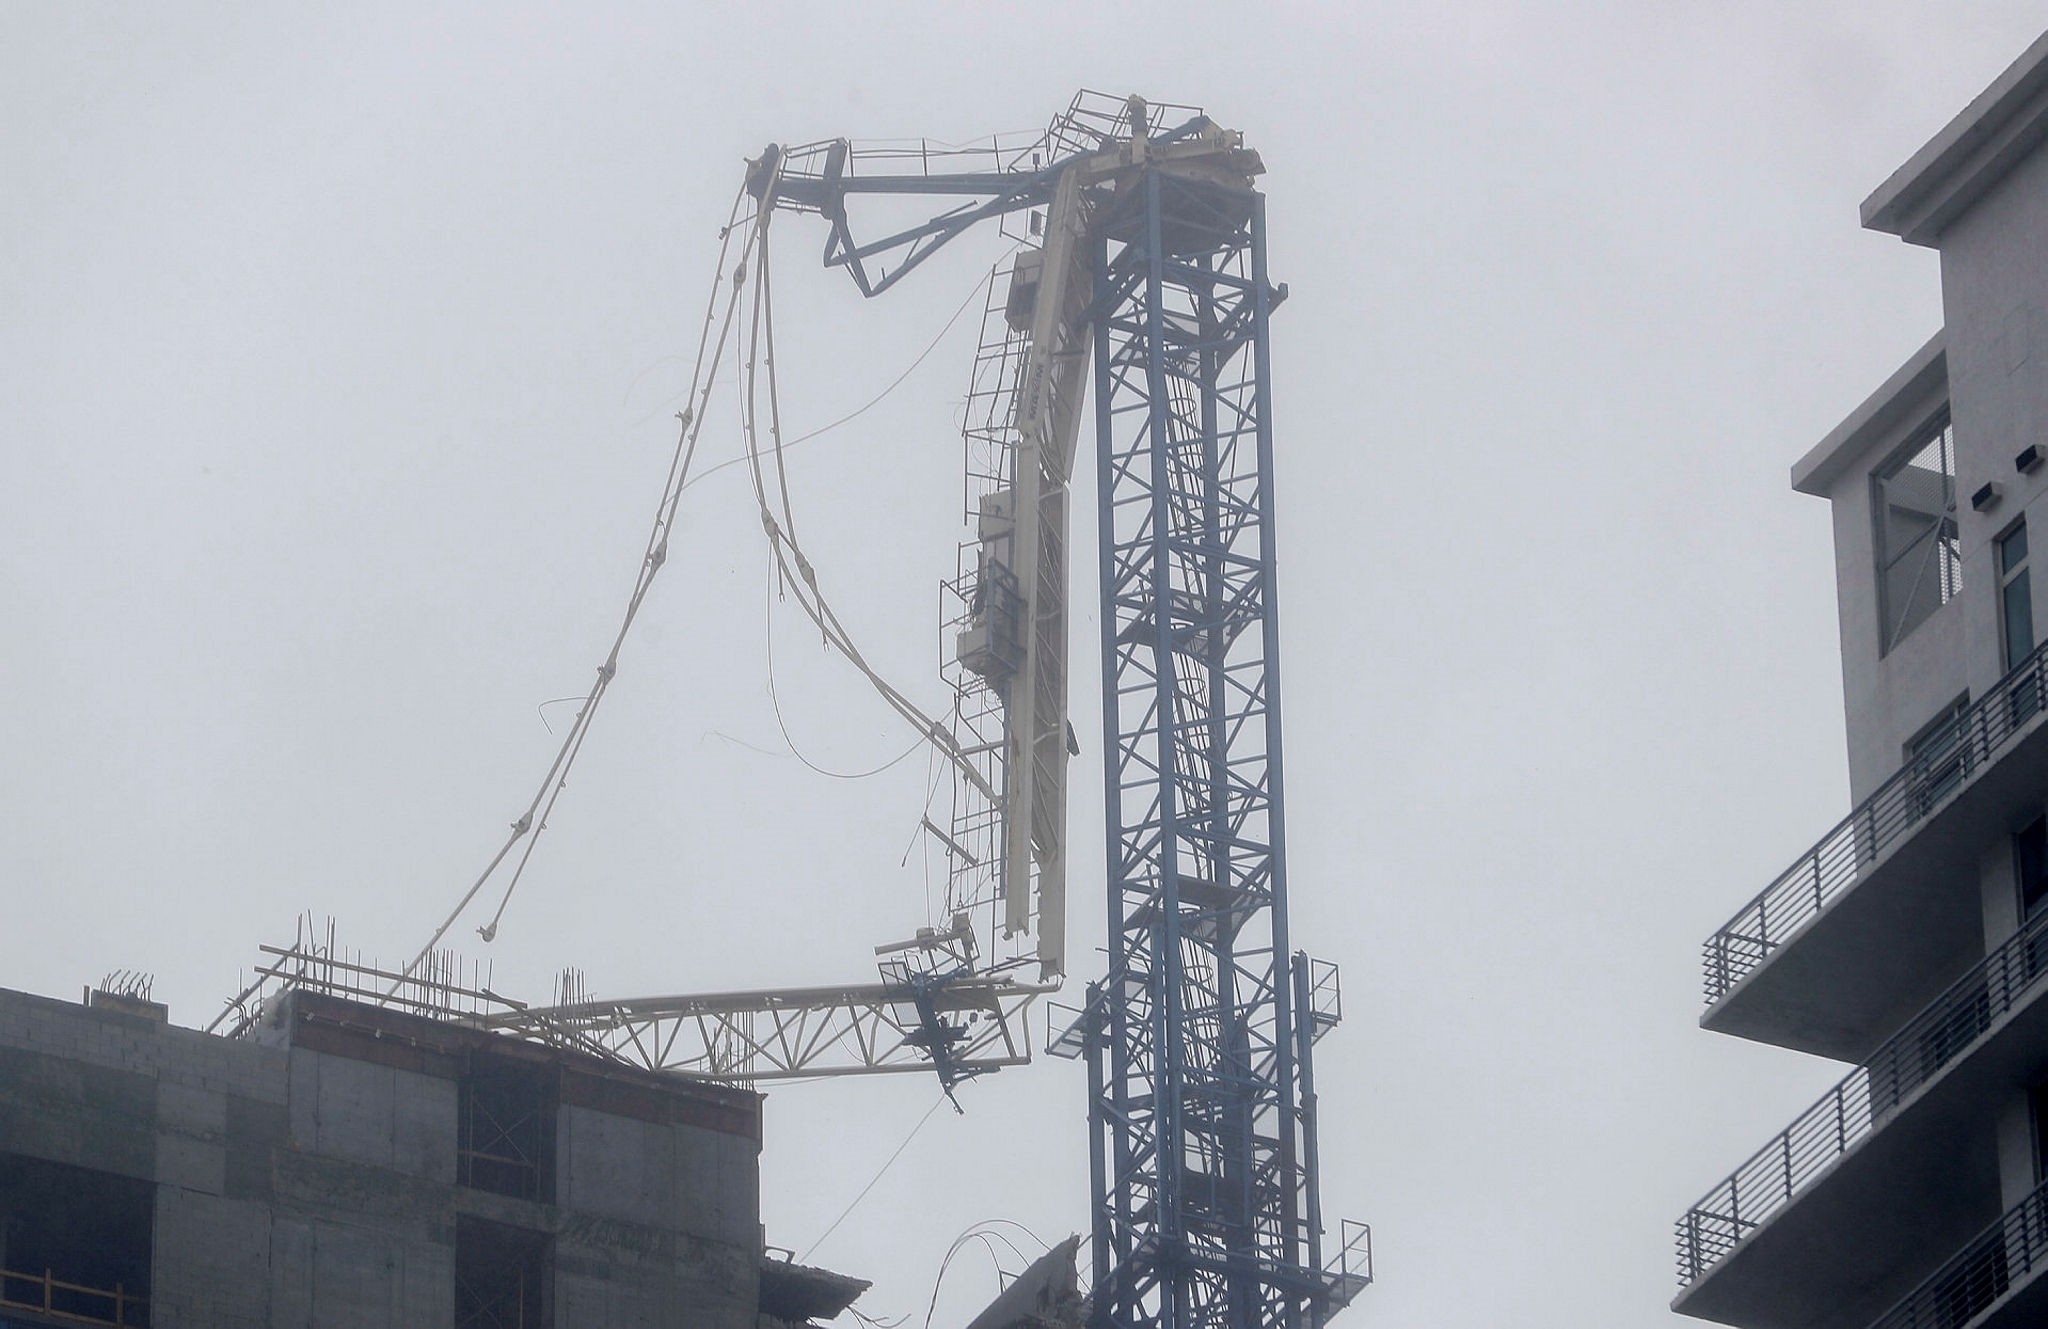 A partially collapsed construction tower crane as Hurricane Irma strikes in Miami, Florida, USA, 10 September 2017. The National Hurricane Center has rated Irma as a Category 4 storm as the eye crosses the lower Florida Keys. (EPA Photo)